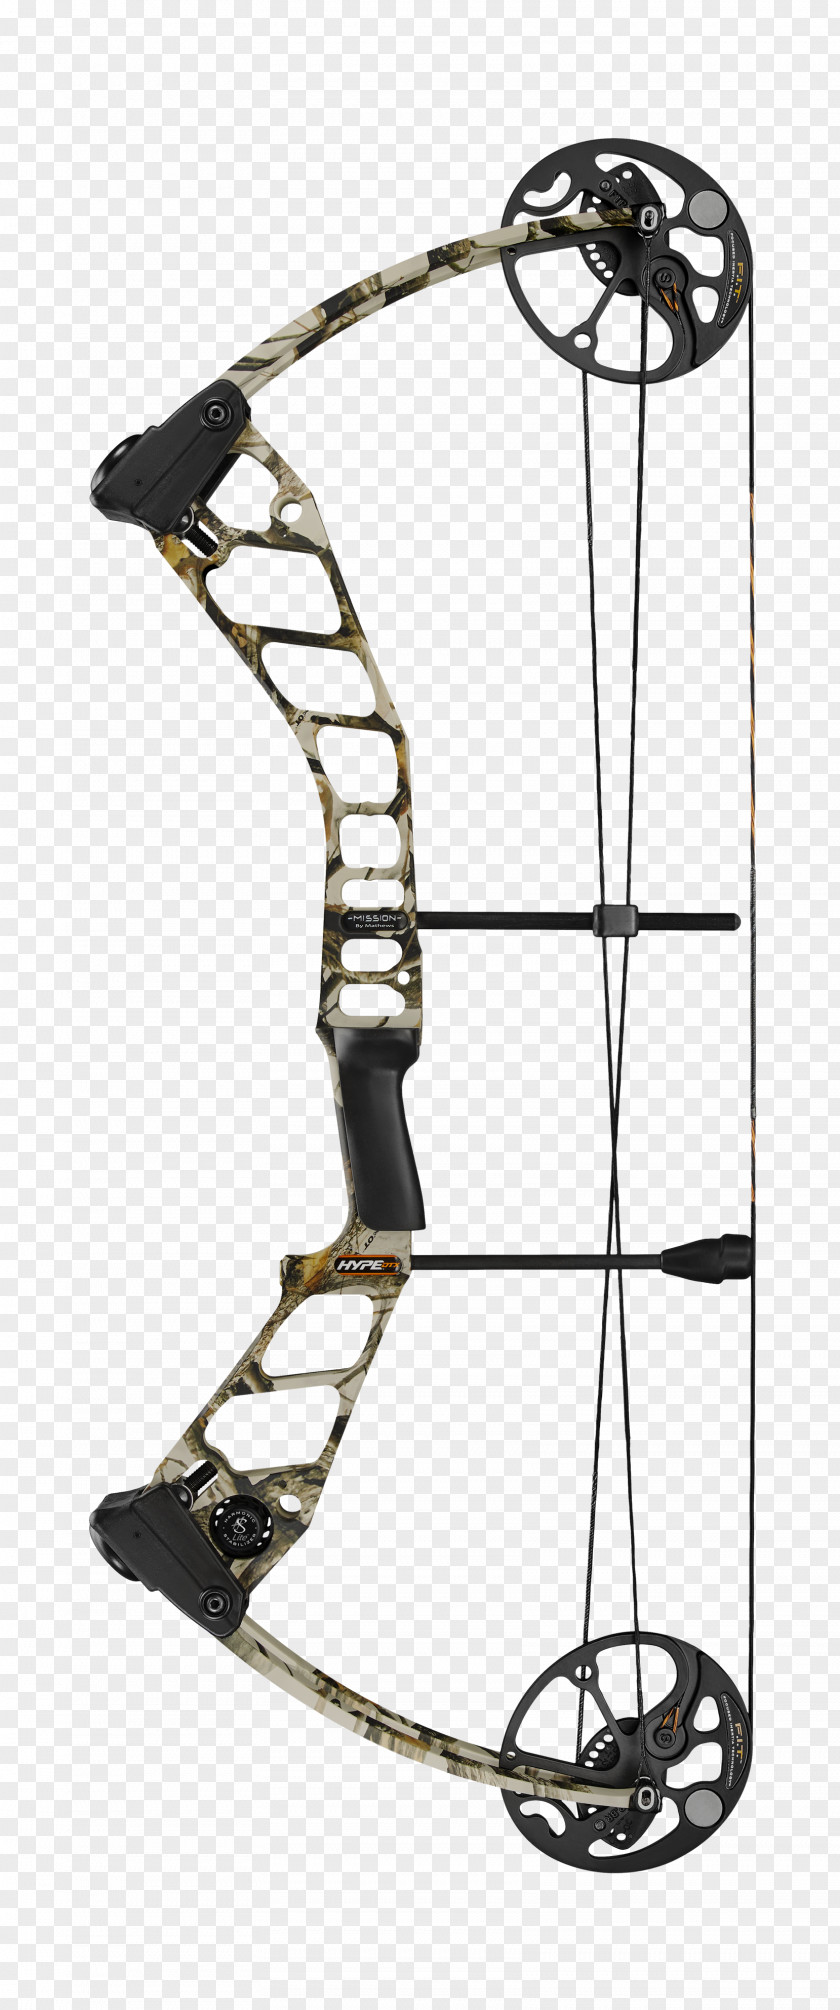 MISSION Compound Bows Archery Bow And Arrow Bowhunting PNG